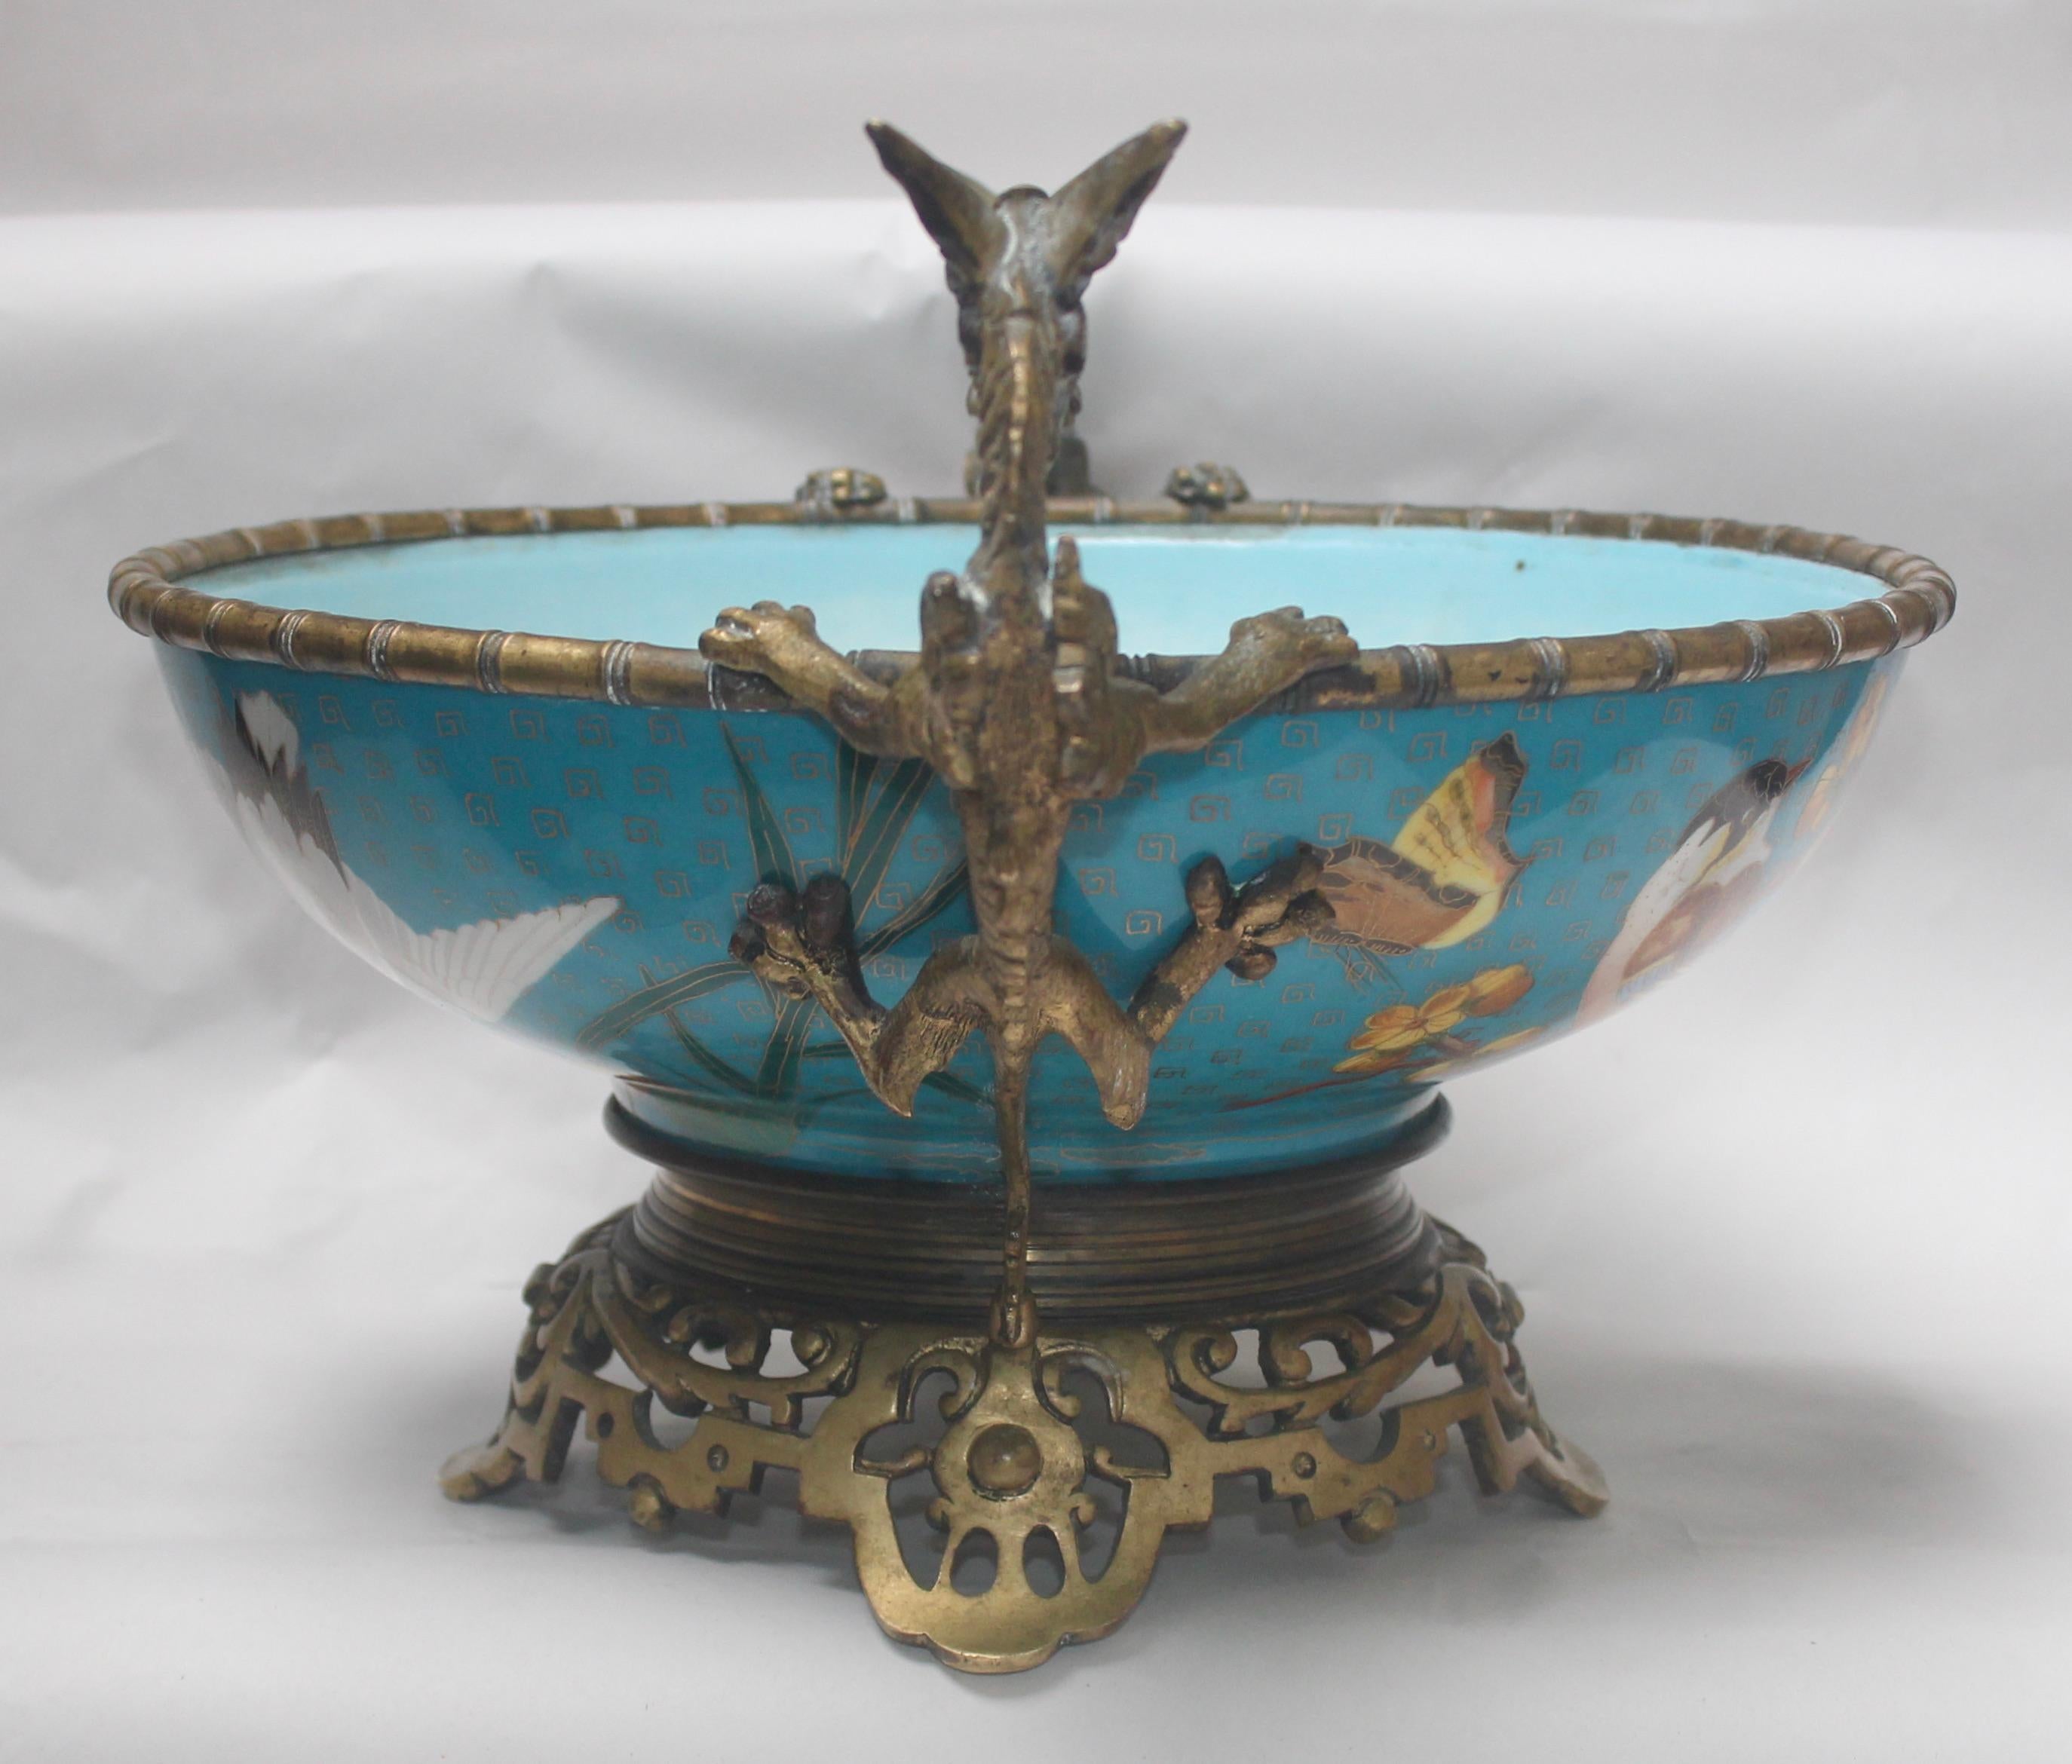 Chinoiserie French 19th Century Ormolu-Mounted and Porcelain Centerpiece and Vide-Poches